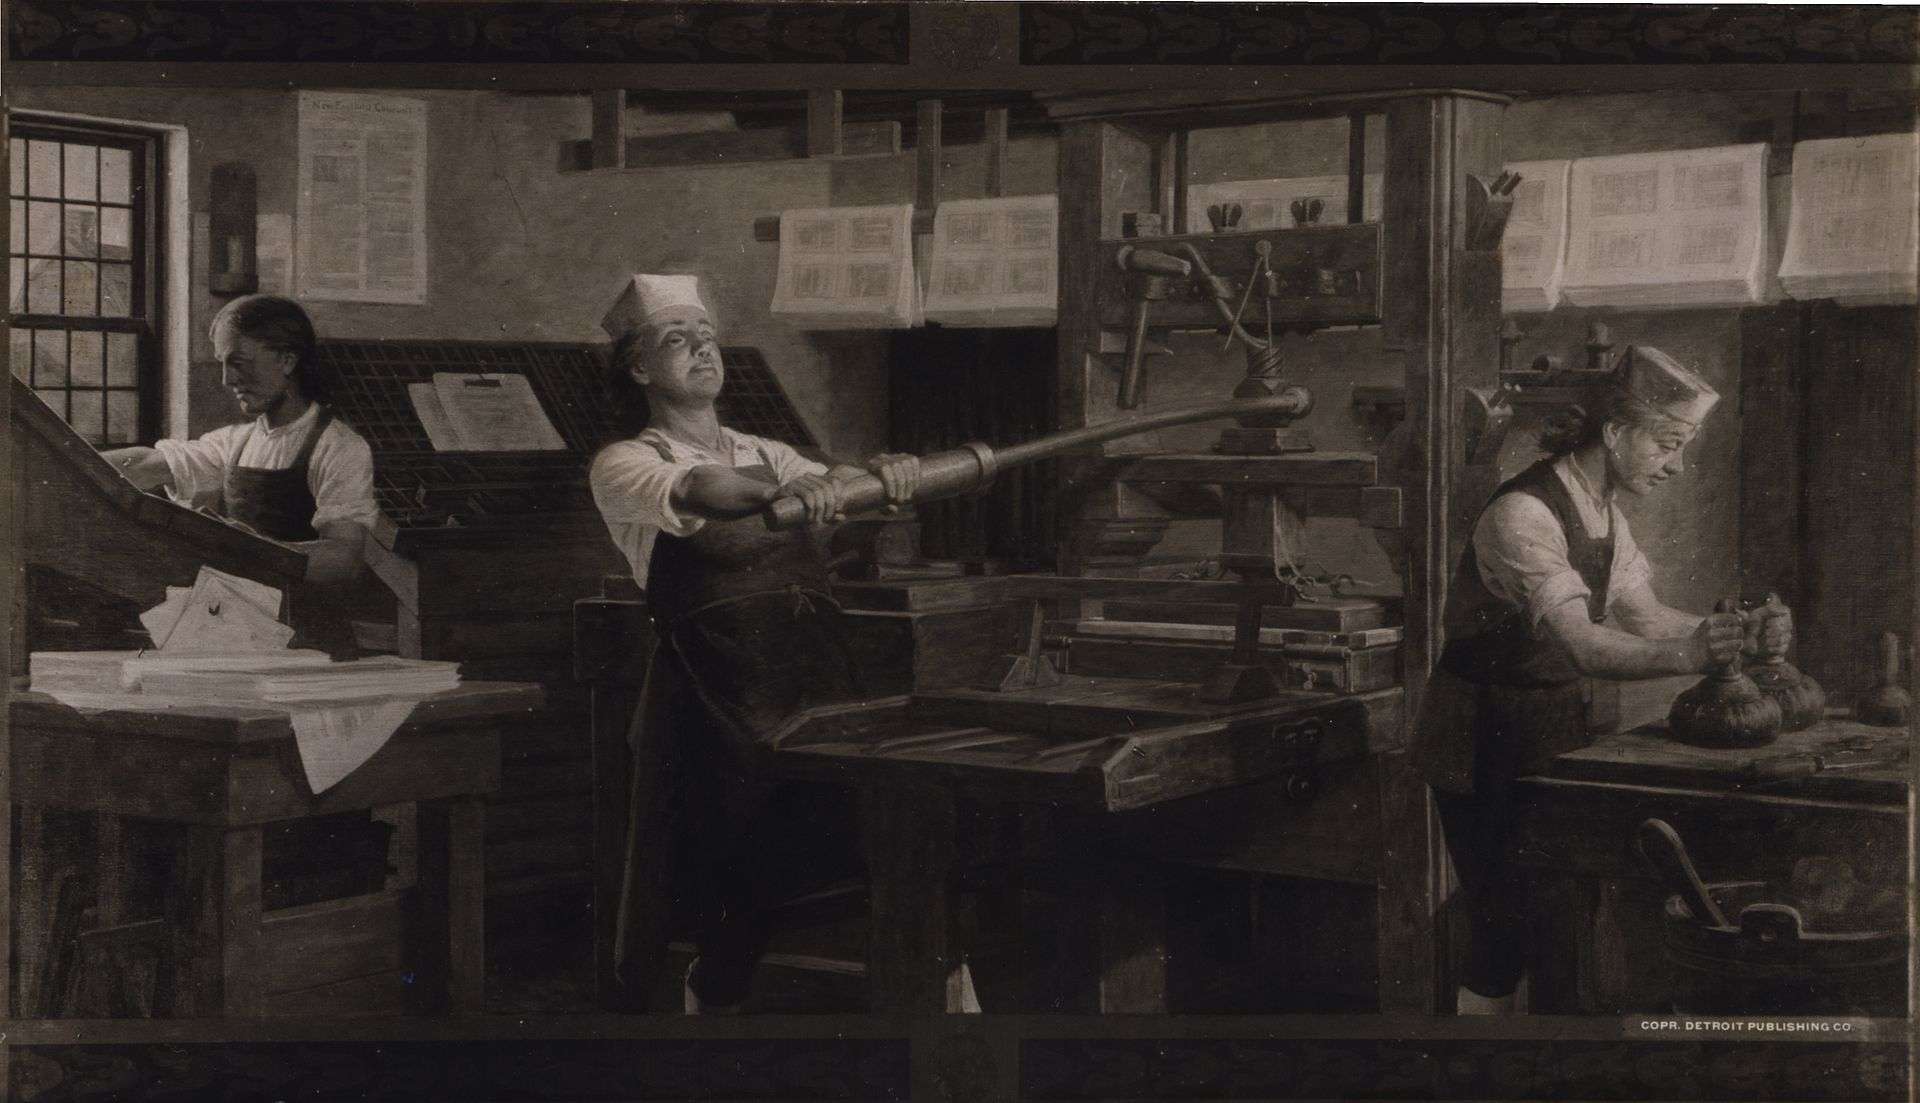 Benjamin Franklin (center) at work on a printing press. Reproduction of a Charles Mills painting by the Detroit Publishing Company.